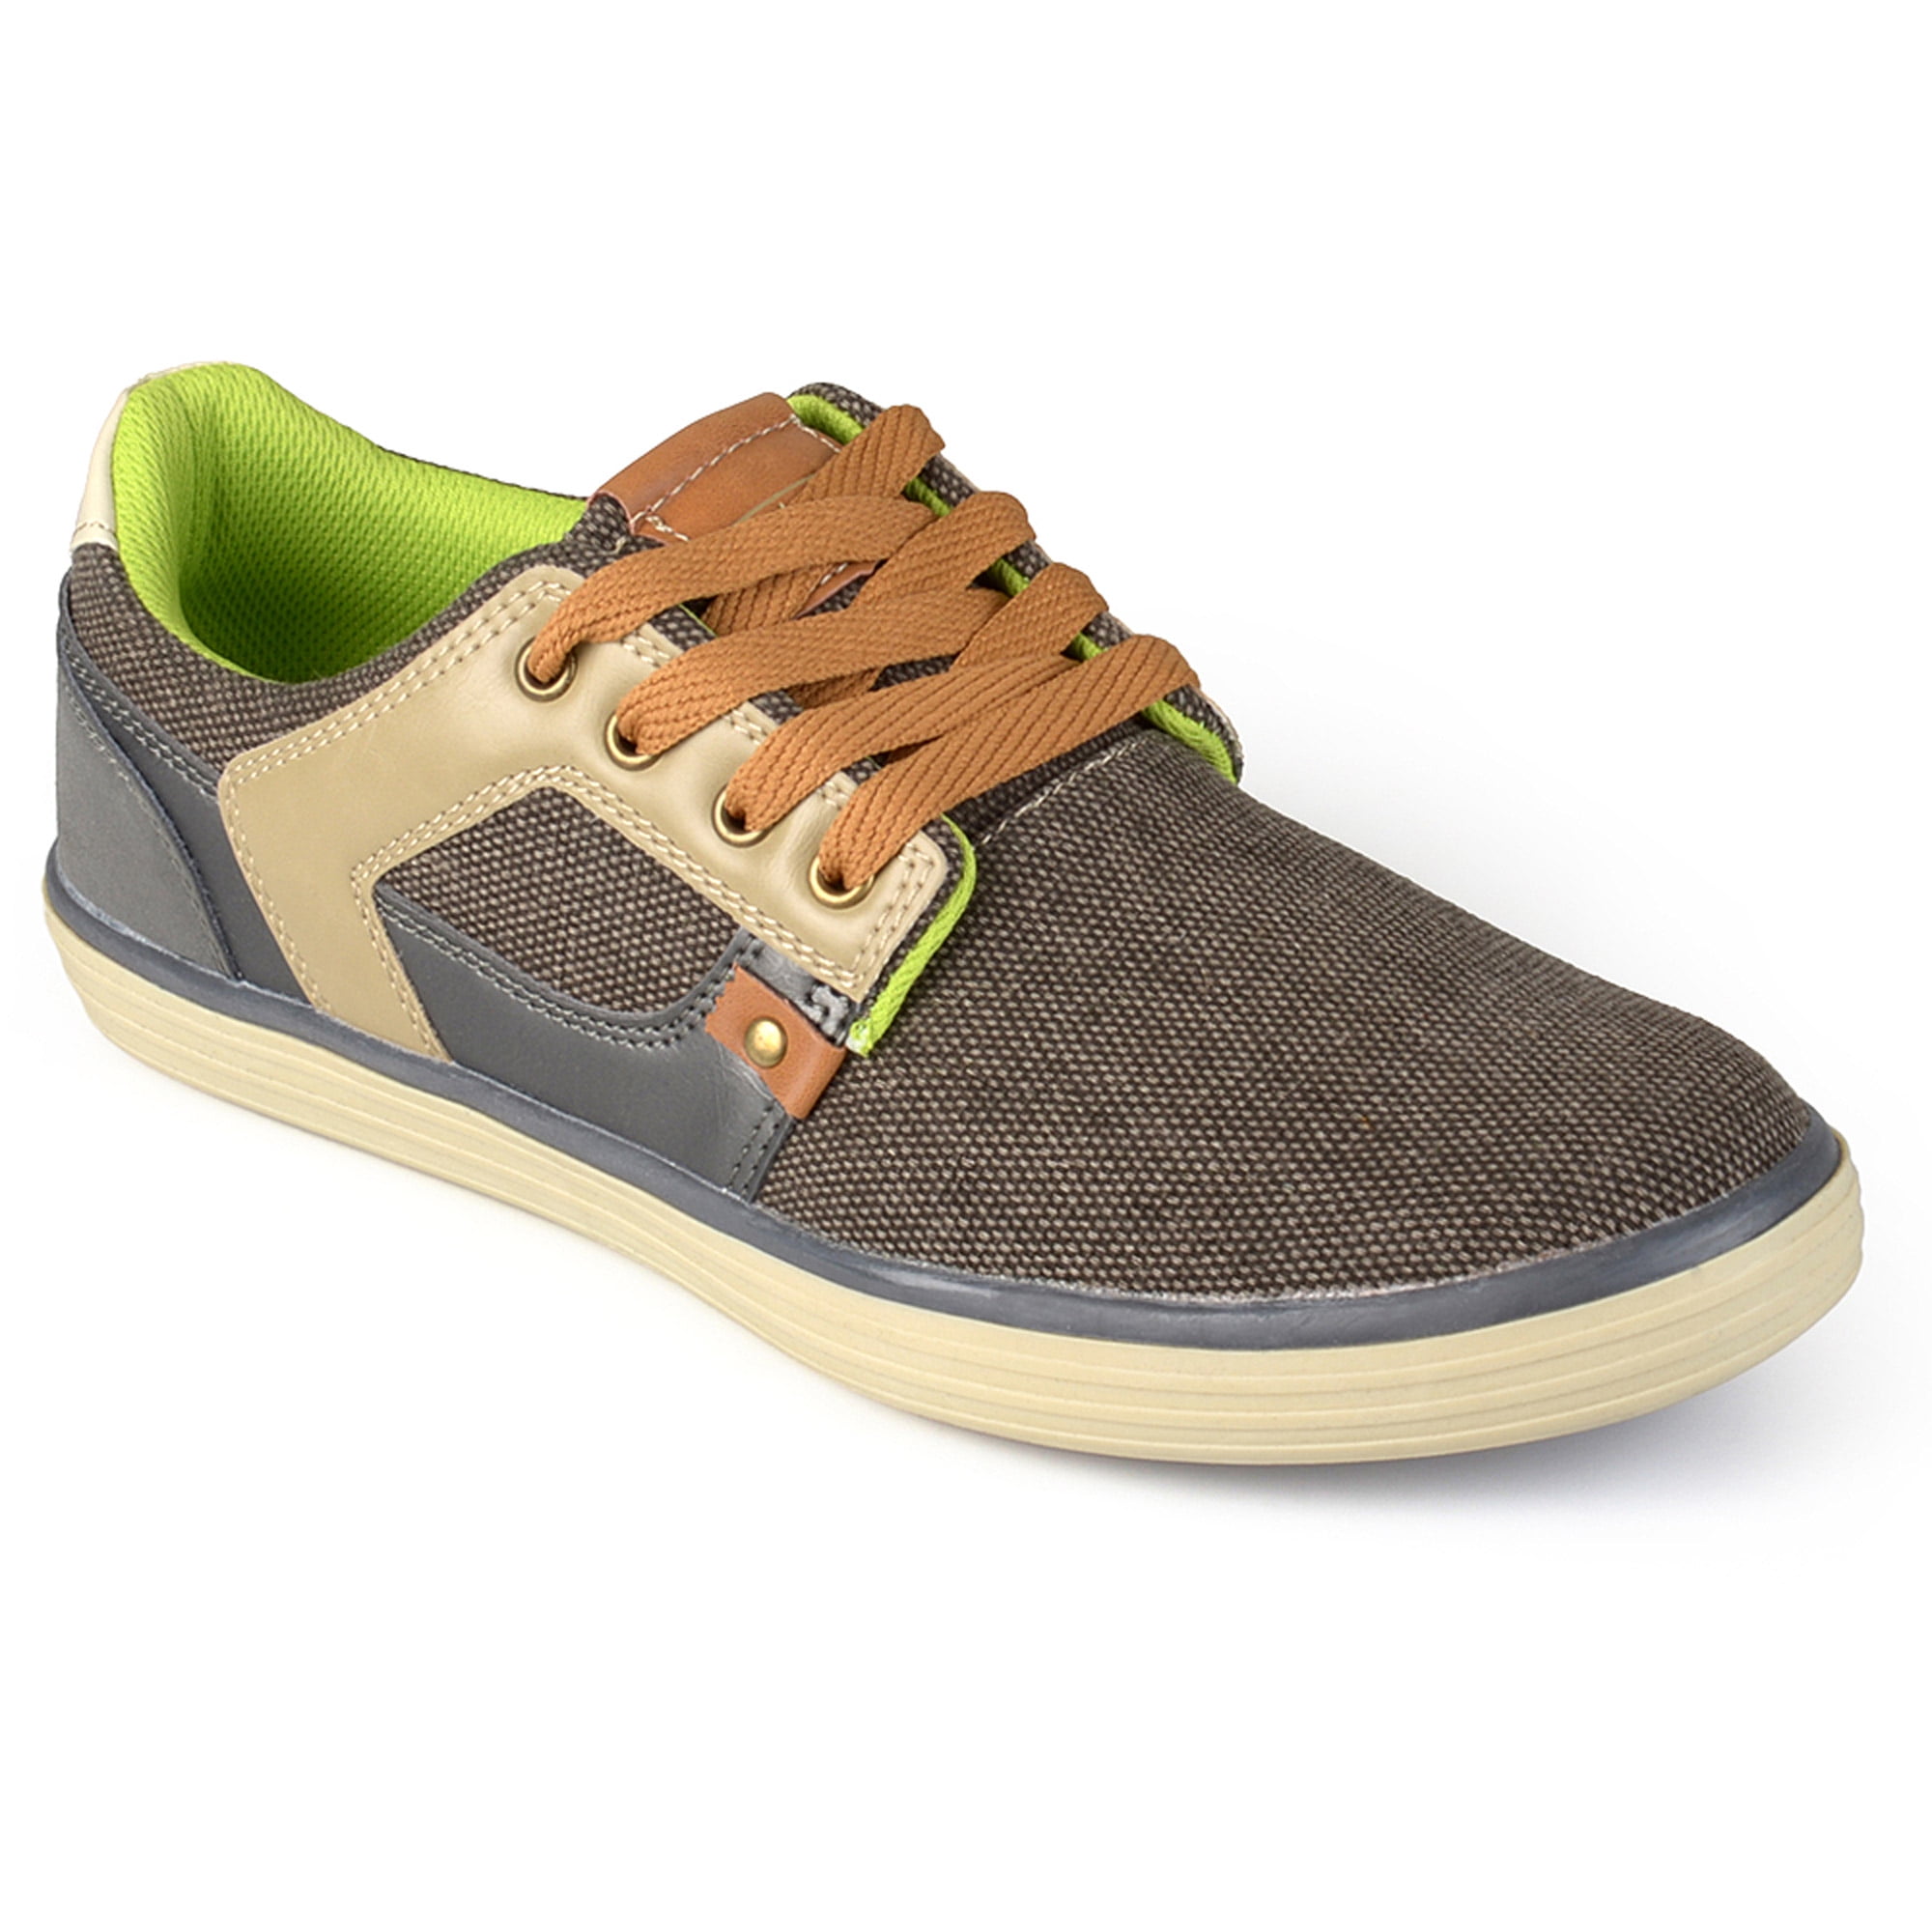 Daxx Mens Fashion Lace-up Sneakers - Walmart.com